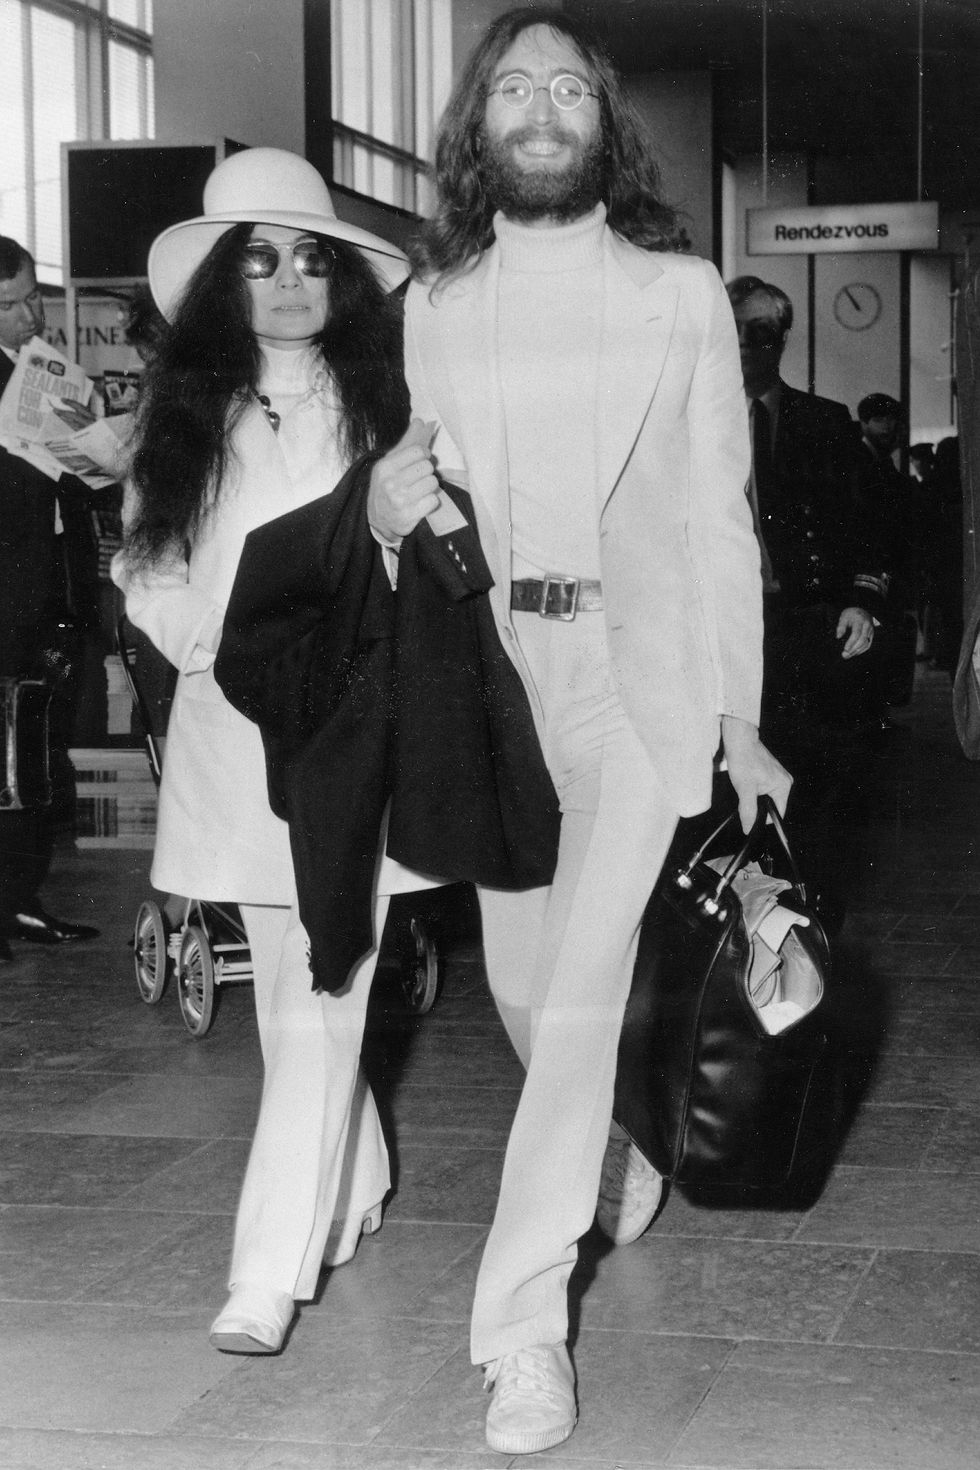 (GERMANY OUT) Lennon, John ,   (*09.10.1940-08.12.1980+)  , Musician, composer, author, Great Britain, guitarist and singer of the 'Beatles', with wife Yoko Ono, clad in white  (Photo by ullstein bild via Getty Images)